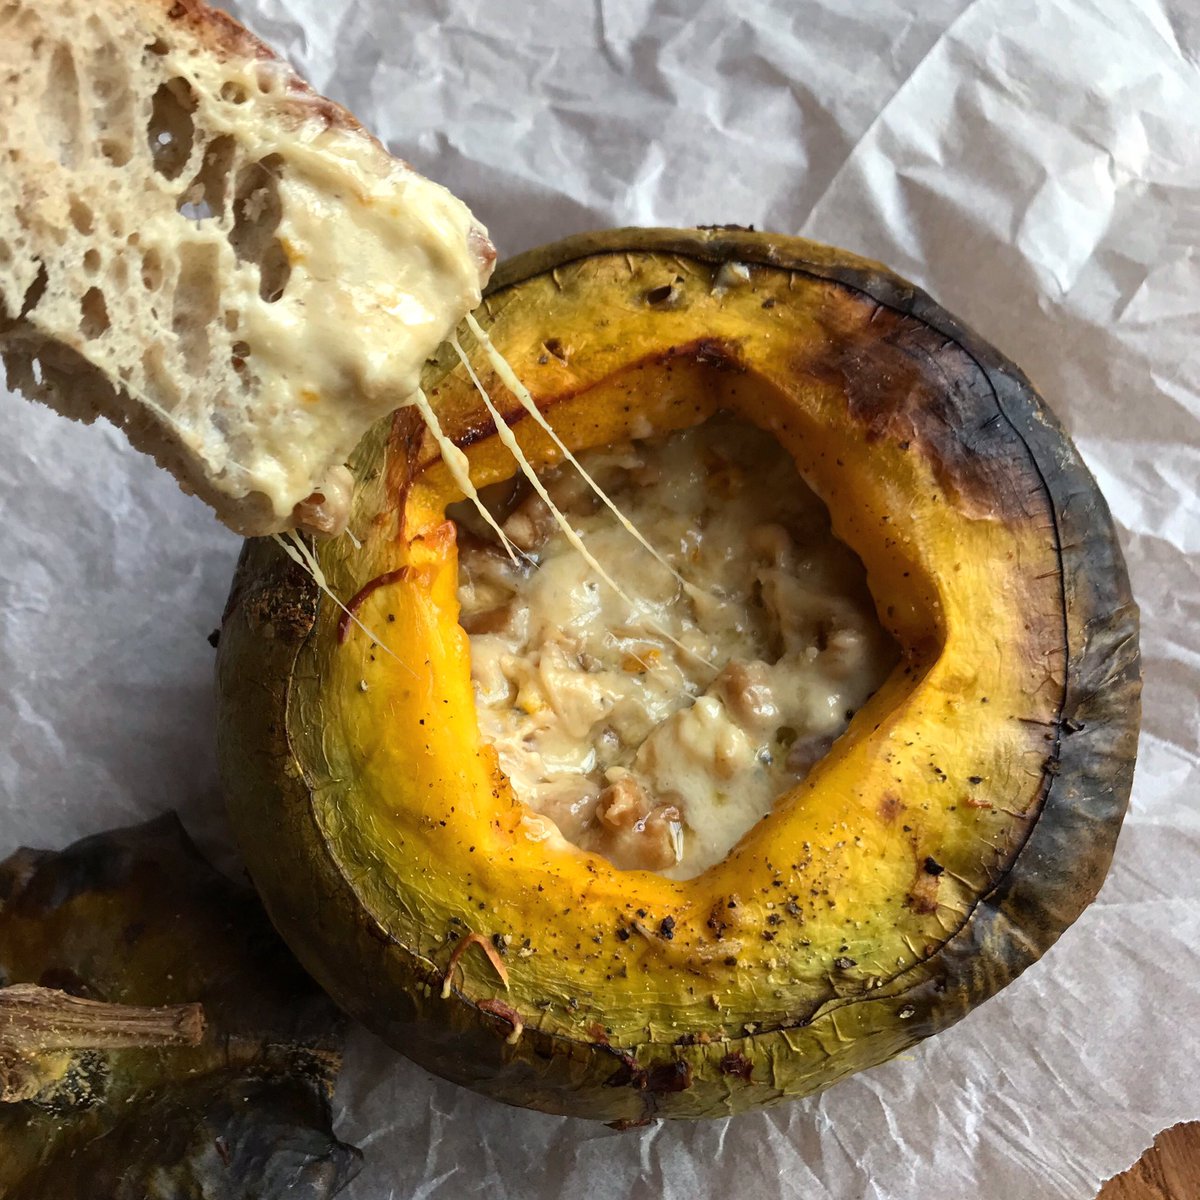 If you’re still looking for new ideas for your haul of homegrown squash, it’s this - squash fondue #homecook #squash #squashfondue #fondue #lockdowncook #norfolk diaryofacountrygirl.com/2021/01/05/che…